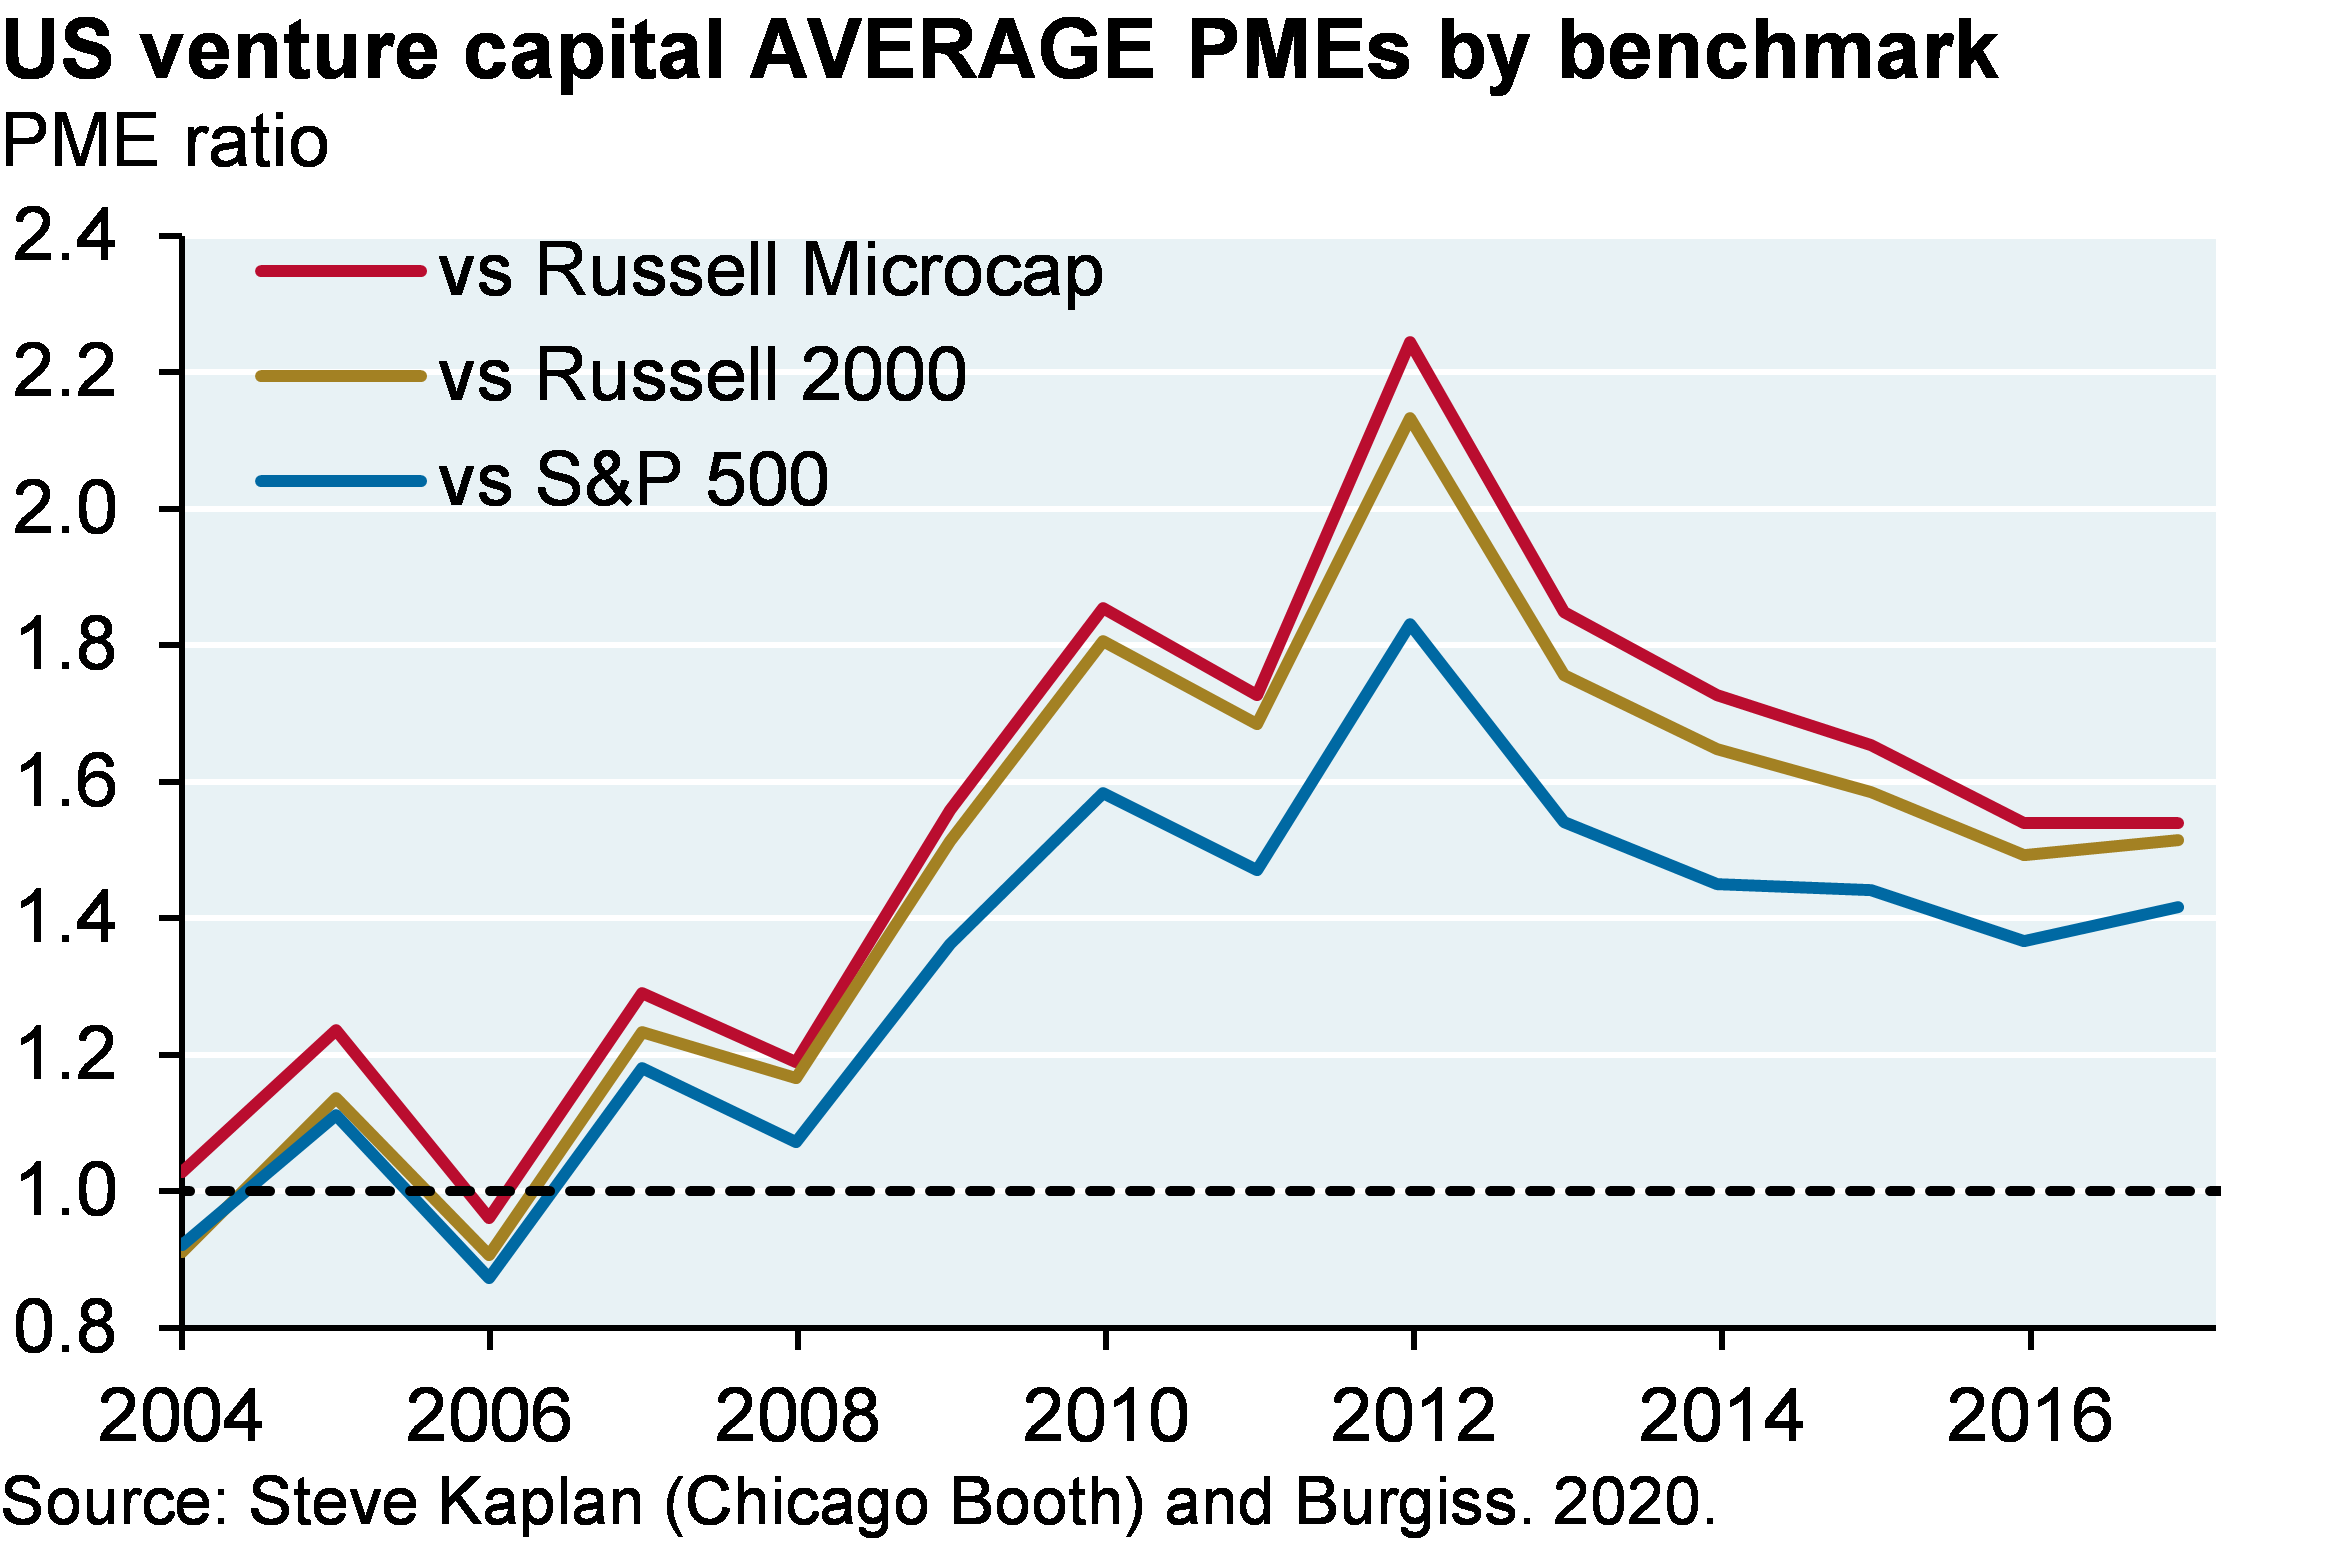 Line chart which shows US venture capital average public market equivalent ratios (PME), showing the PME vs the Russell Microcap, the Russell 2000, and the S&P 500. A PME above 1 indicates that the venture capital performance outperformed the benchmark. Since 2004, the PME ratios for all benchmarks steadily increased from around 1 to around 2.2 in 2012. Since then the PME ratios have declined to around 1.6. Over time, the PME vs Russell Microcap has been slightly higher than the PME vs Russell 2000. There has been a wider gap between the PME vs Russell 2000 and the PME vs S&P 500. In 2012, the PME vs S&P 500 was 1.8 compared to 2.2 vs the Russell 2000. In the most recent point, the PME vs the Russell 2000 was around 1.5 compared to 1.4 vs the S&P 500.